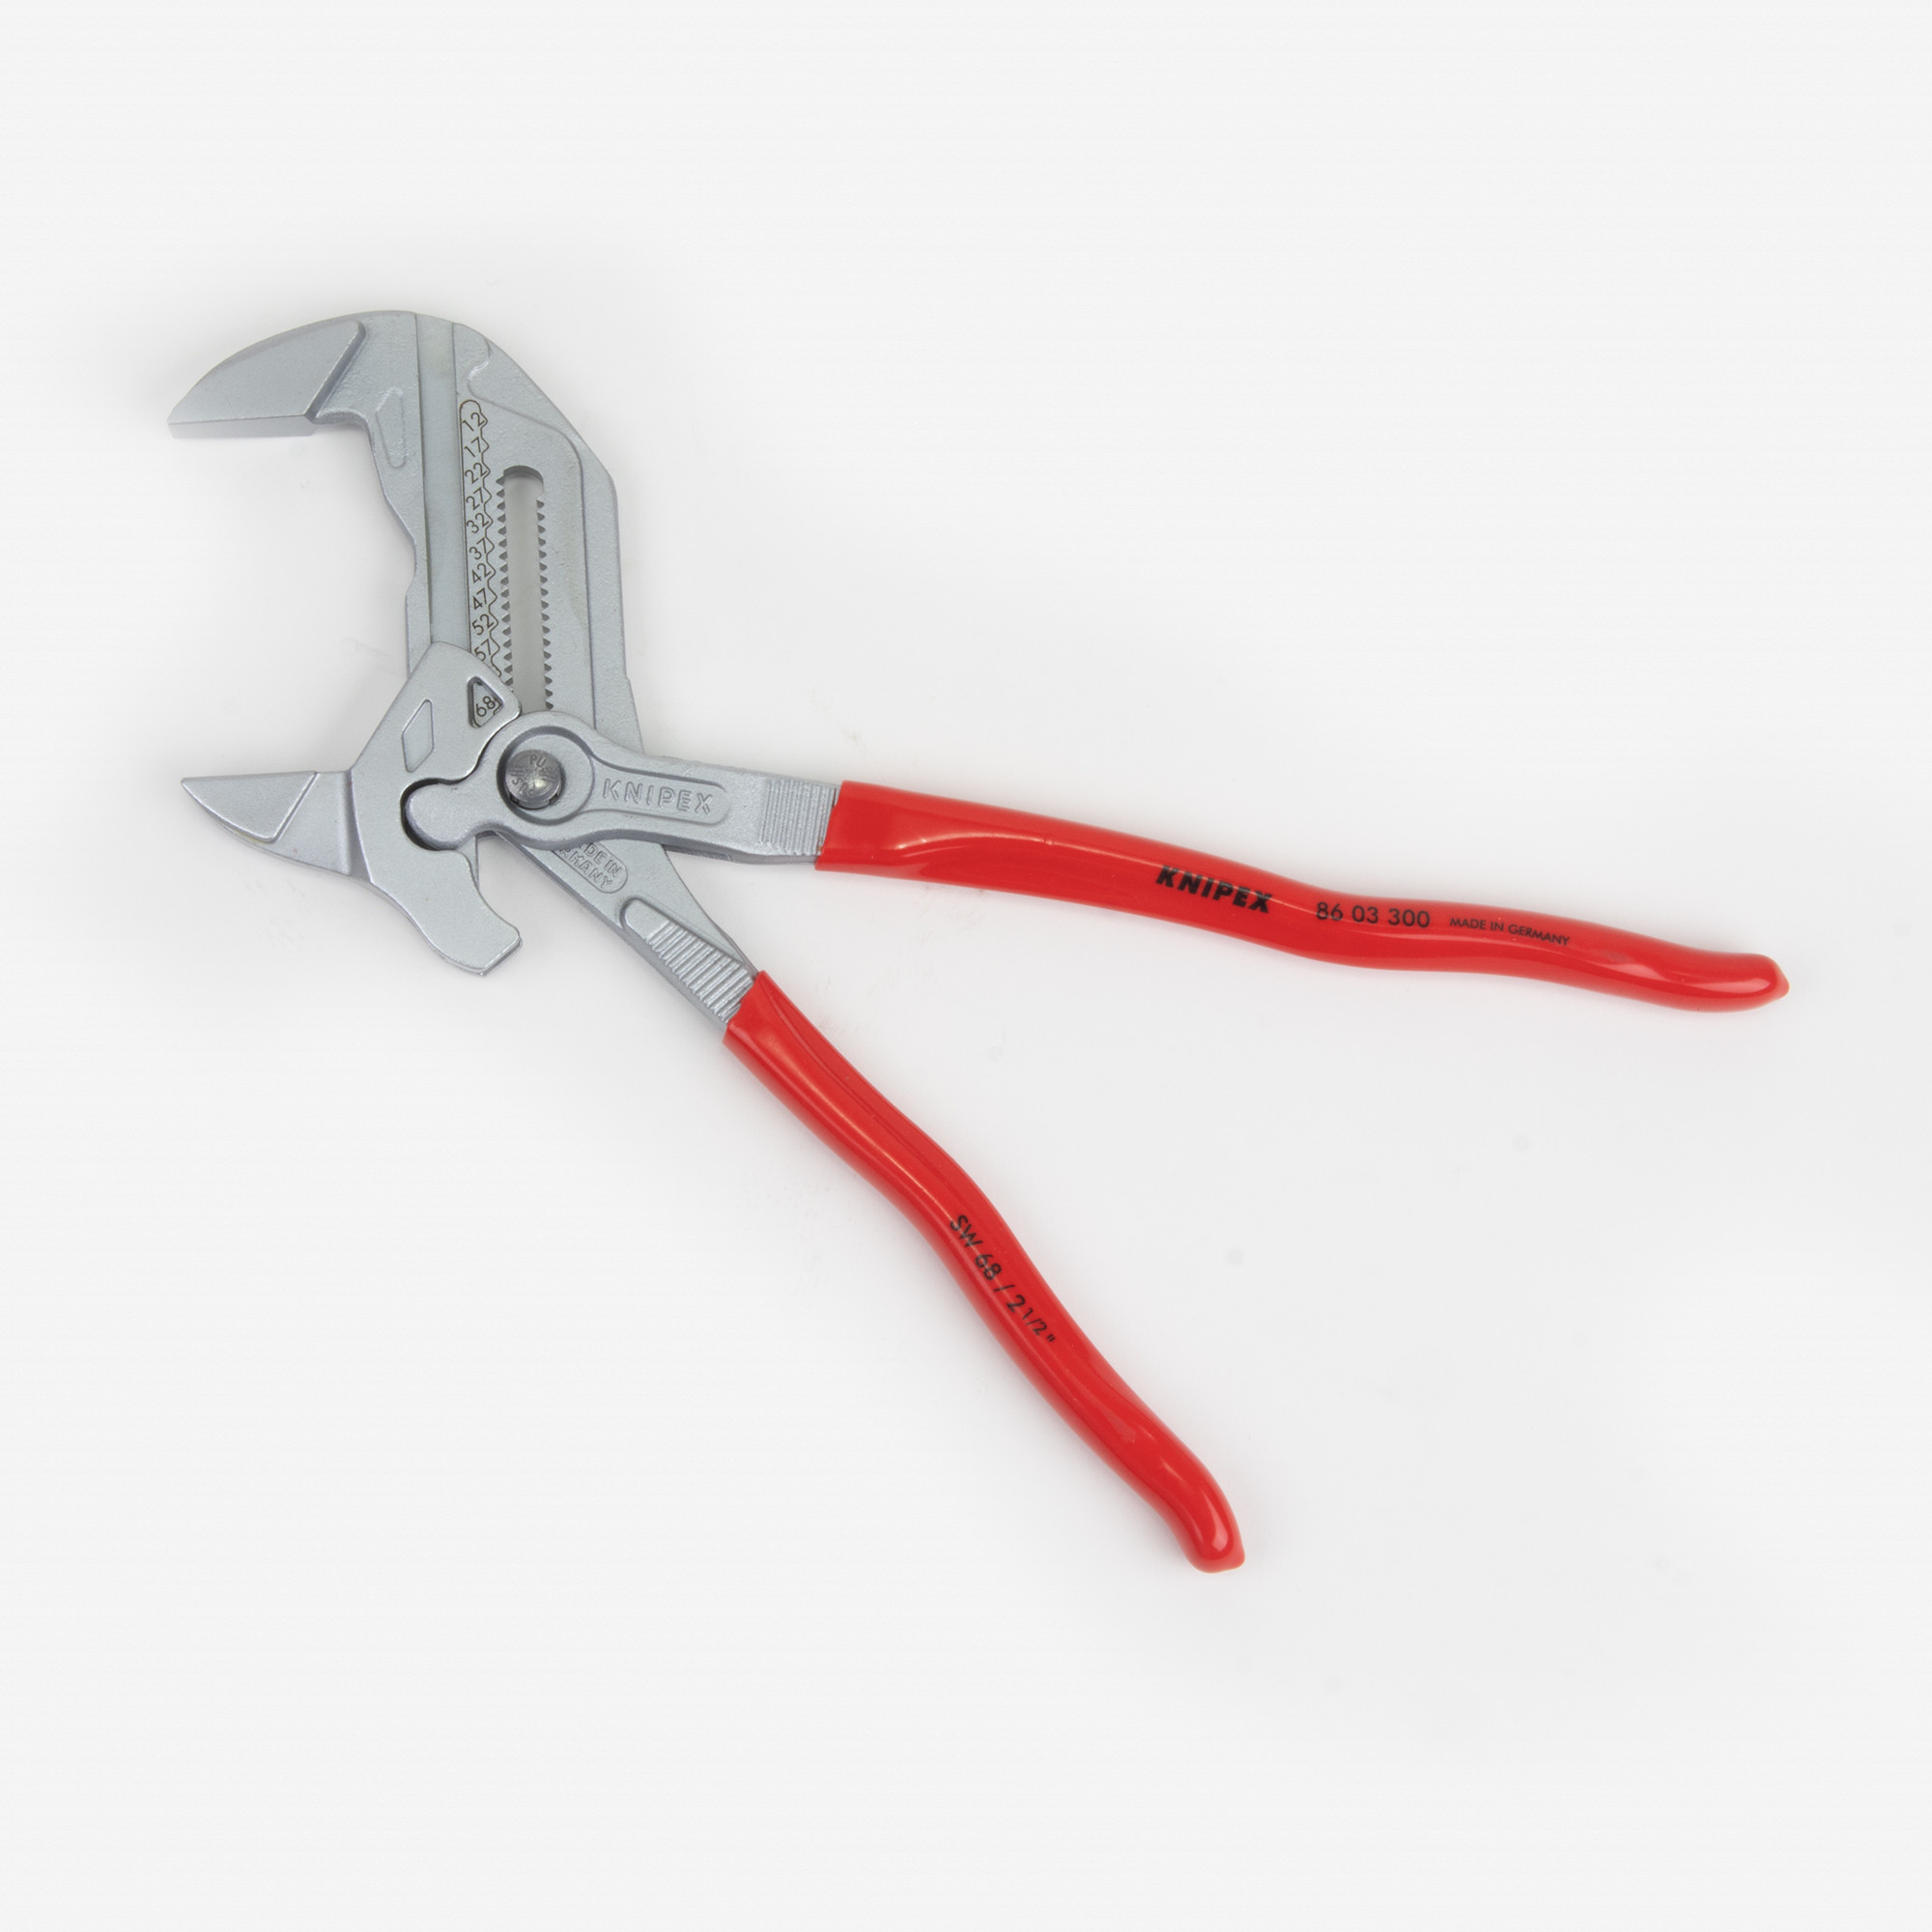 KNIPEX 86 03 300 Pliers Wrench Handles Plastic Coated Adjustable Tightening  Tool